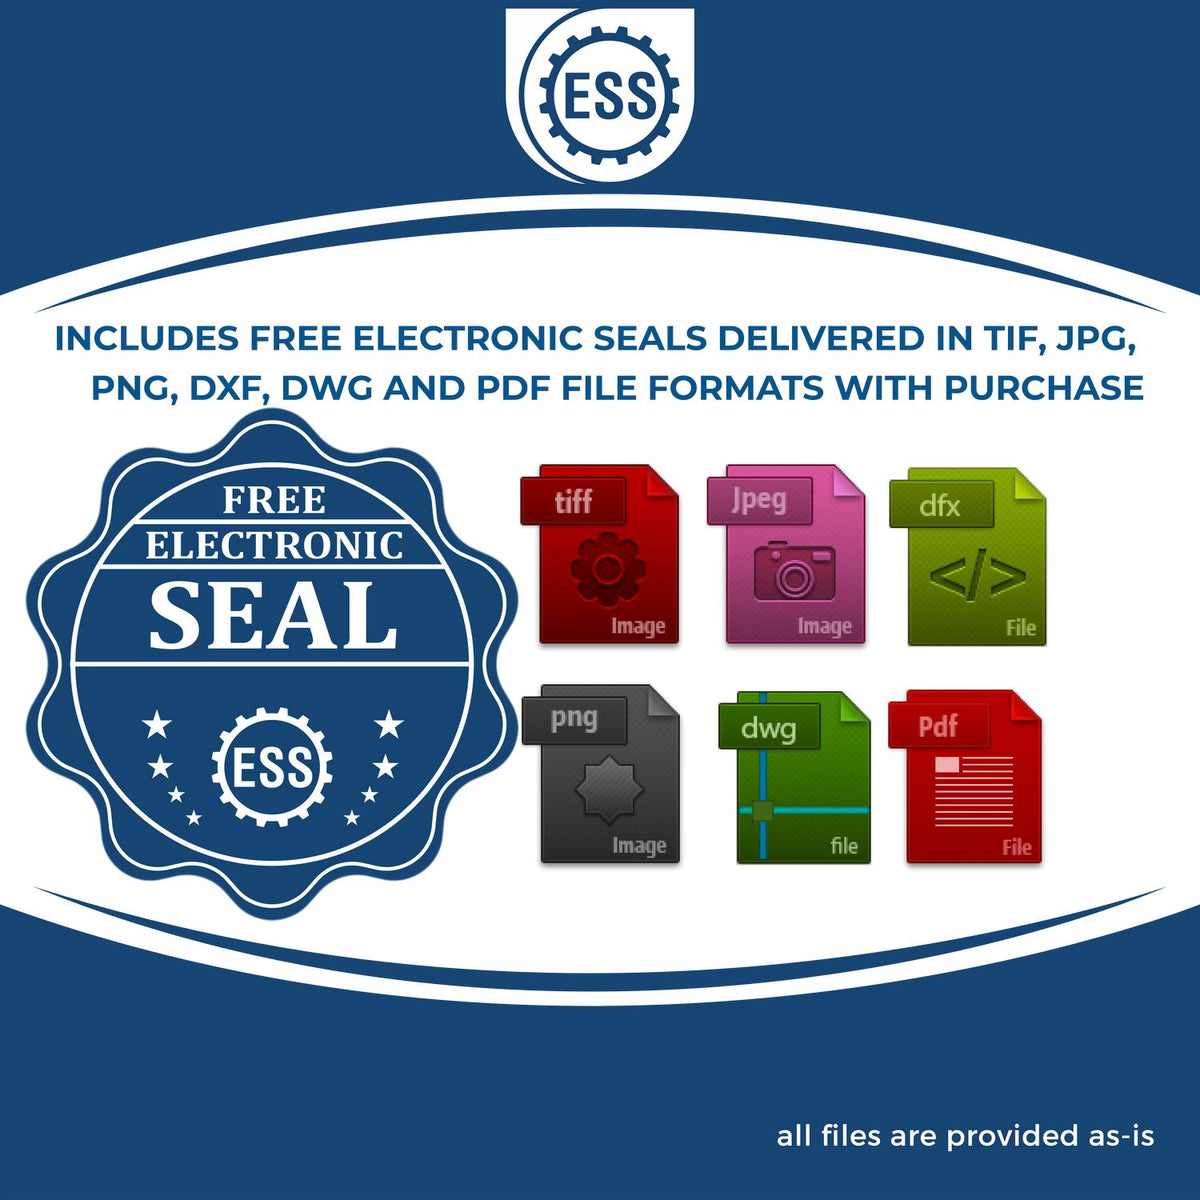 An infographic for the free electronic seal for the Hybrid New Hampshire Landscape Architect Seal illustrating the different file type icons such as DXF, DWG, TIF, JPG and PNG.